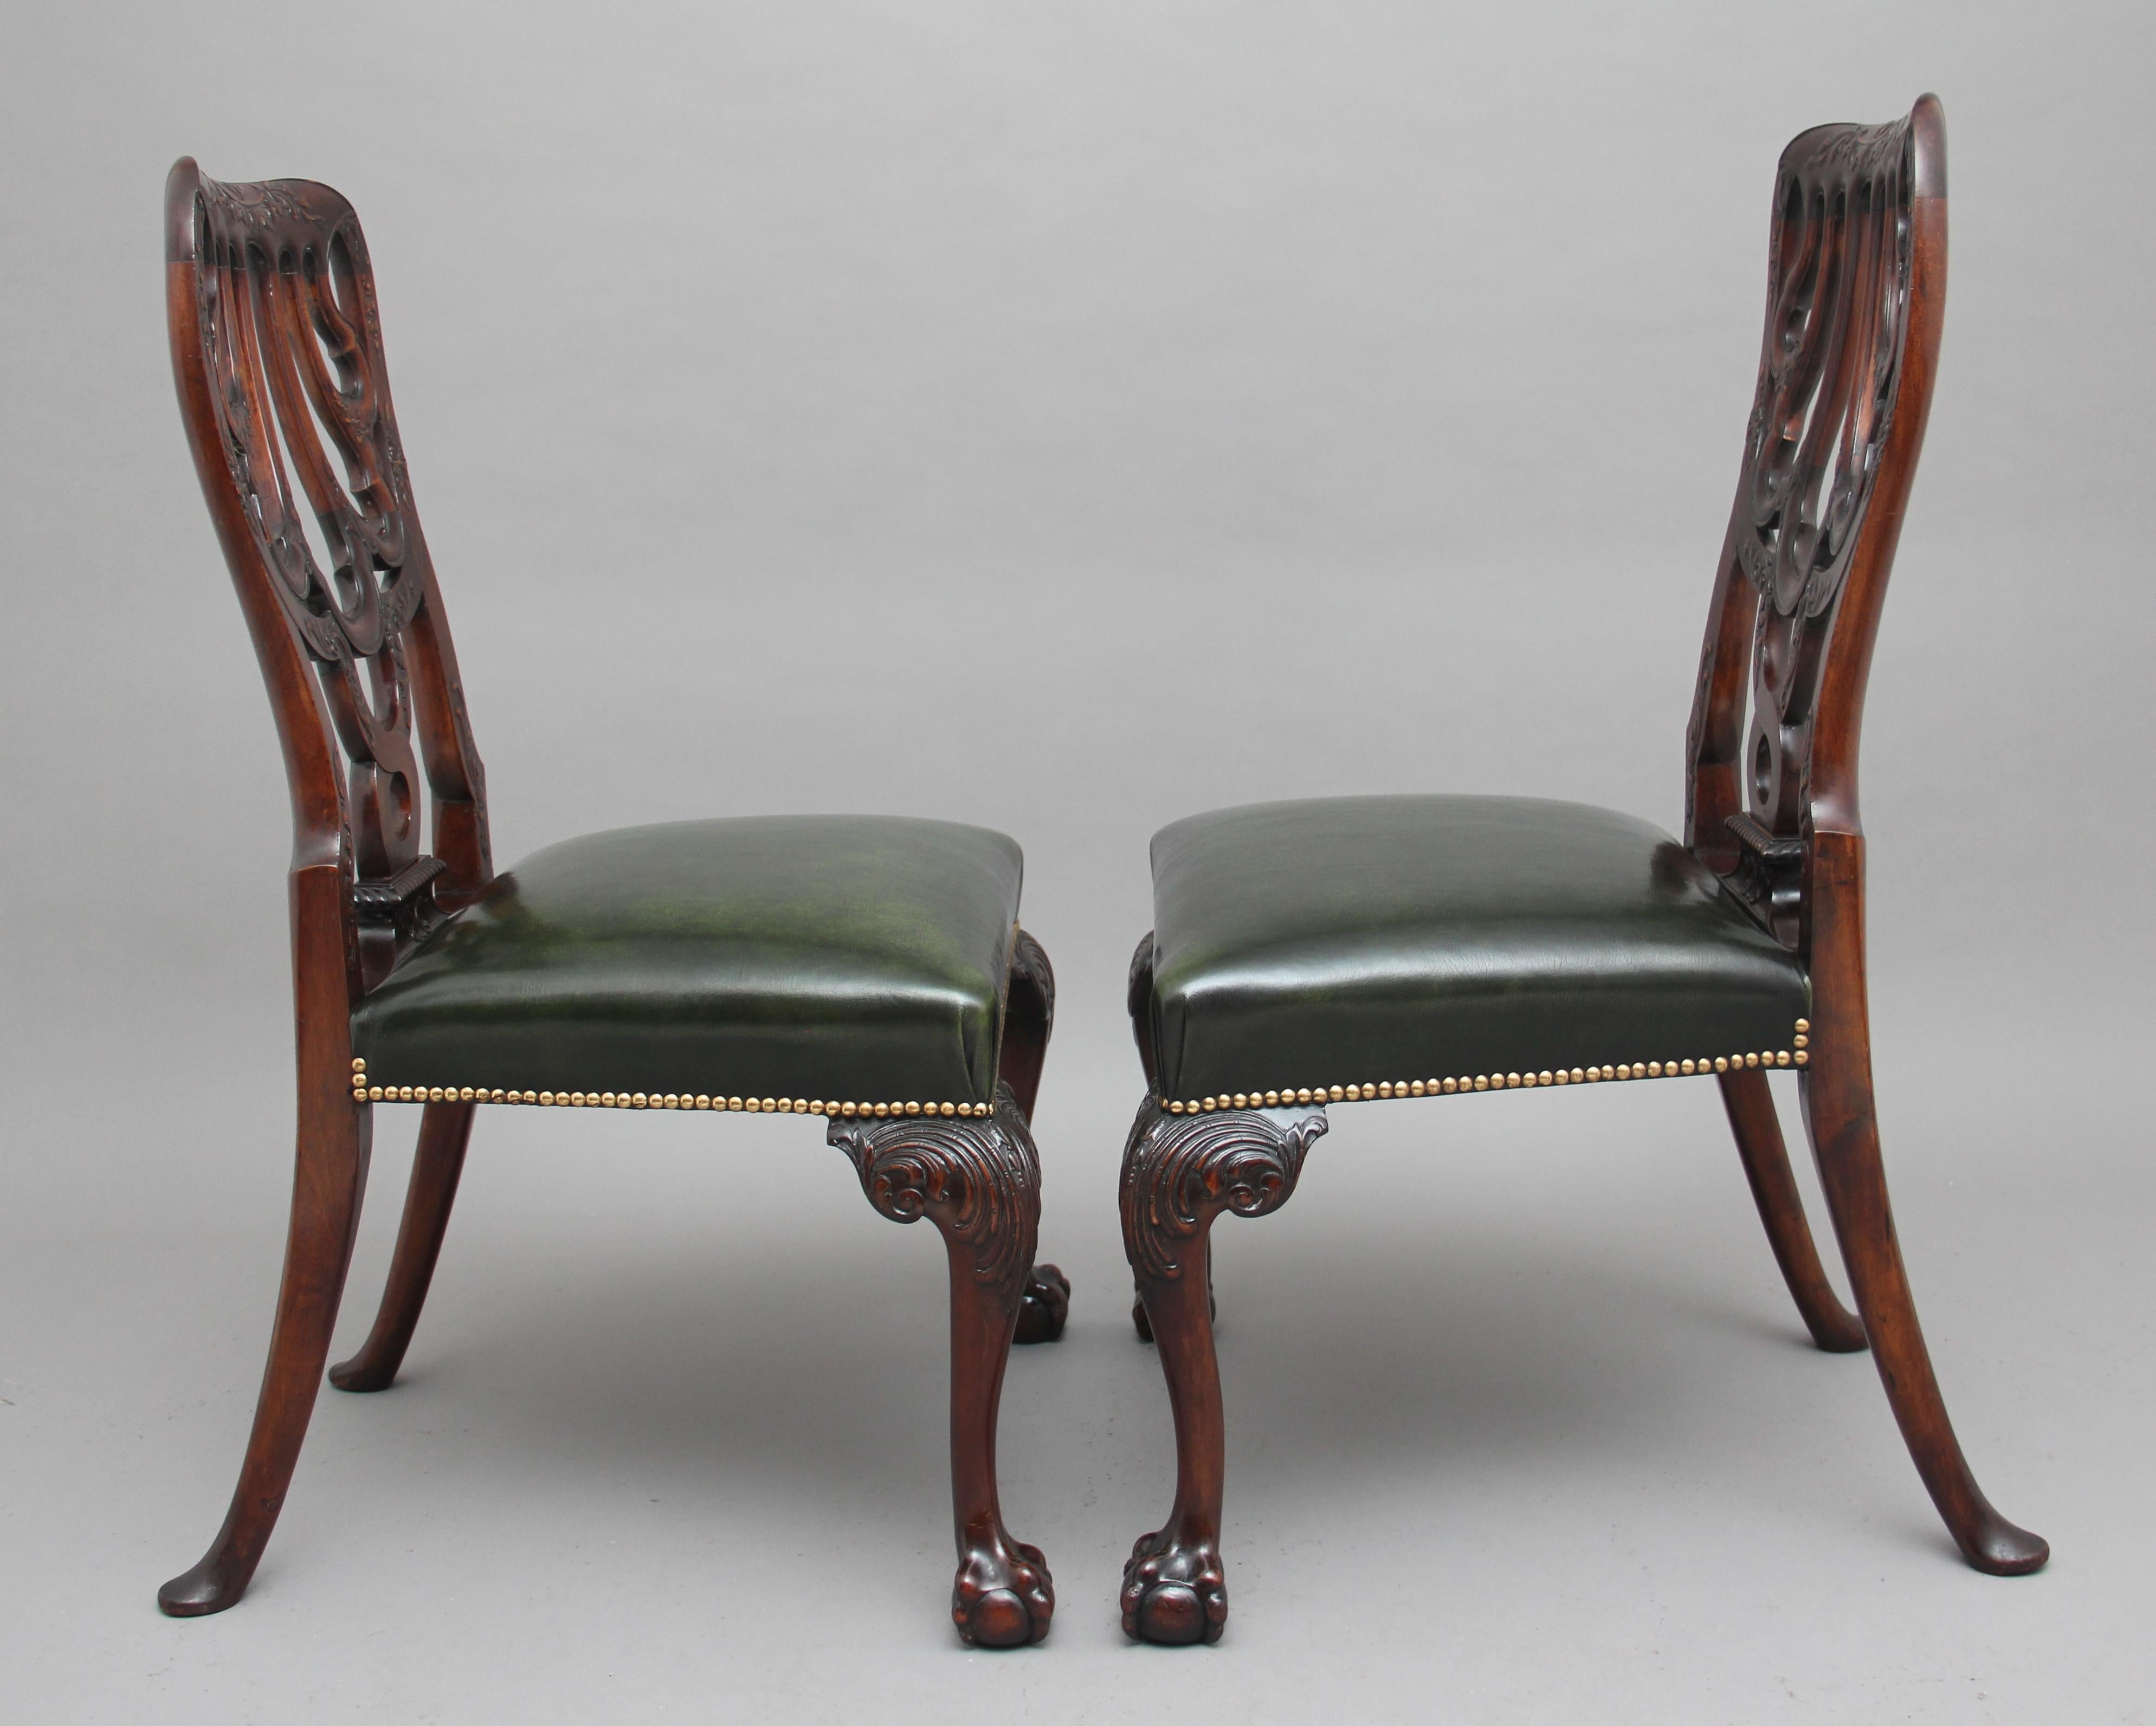 A pair of 19th century carved mahogany side chairs in the Chippendale style, superb quality and lovely dense timber, the carved and shaped back of unique design, the seat having been recently re-upholstered in a green leather with brass stud